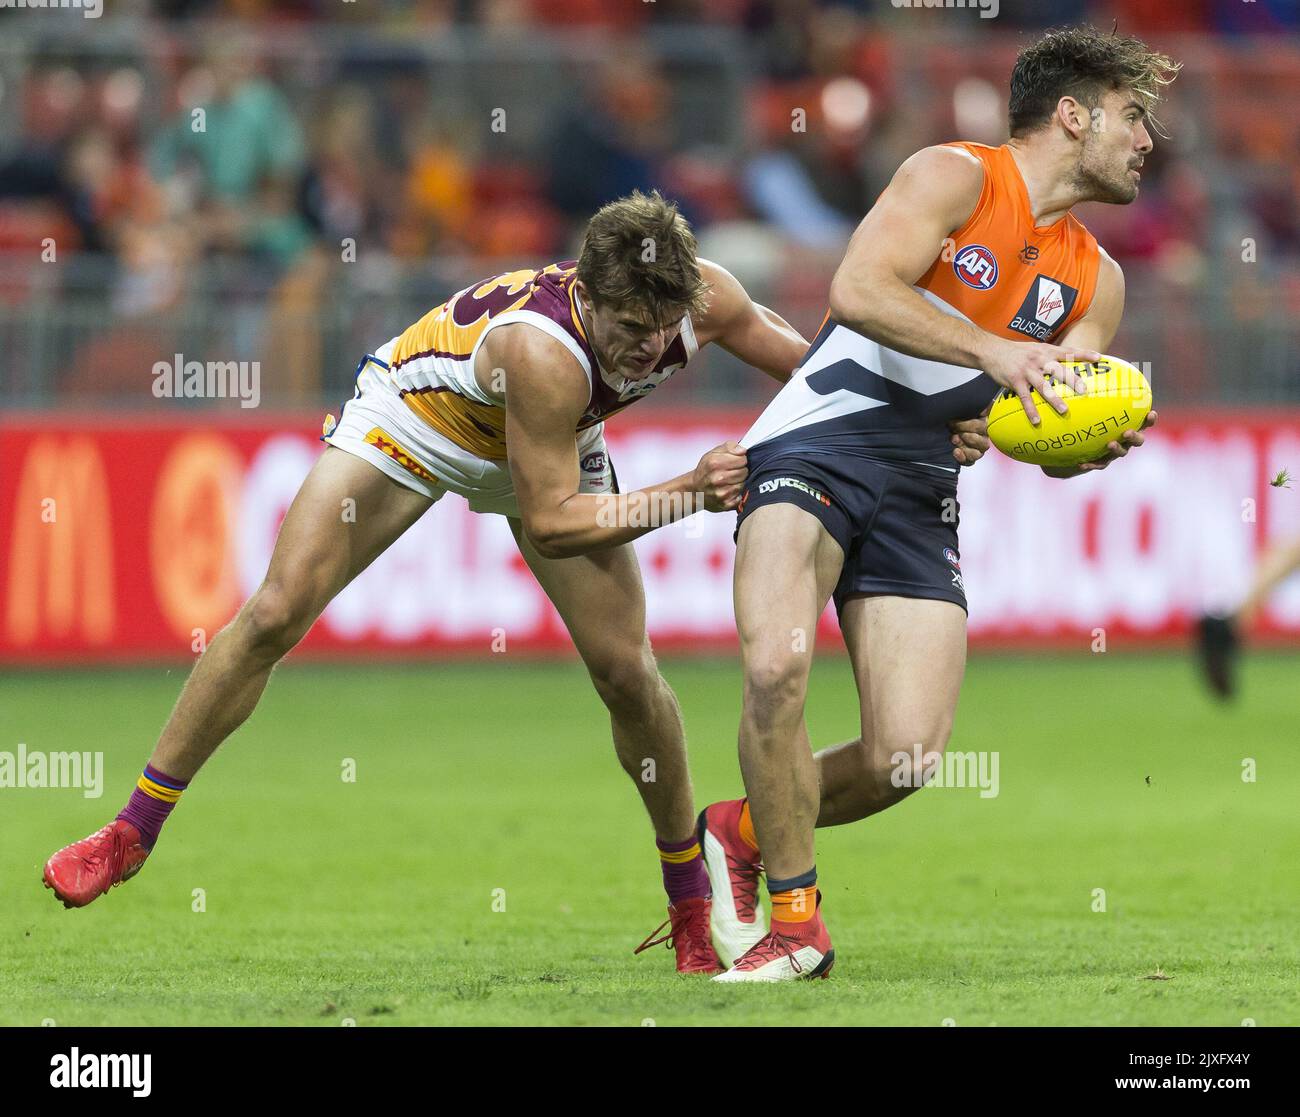 stephen-coniglio-of-the-giants-is-tackled-by-zac-bailey-of-the-lions-during-the-round-6-afl-match-between-the-greater-western-sydney-gws-giants-and-the-brisbane-lions-at-spotless-stadium-in-sydney-saturday-april-28-2018-aap-imagecraig-golding-2JXFX4Y.jpg